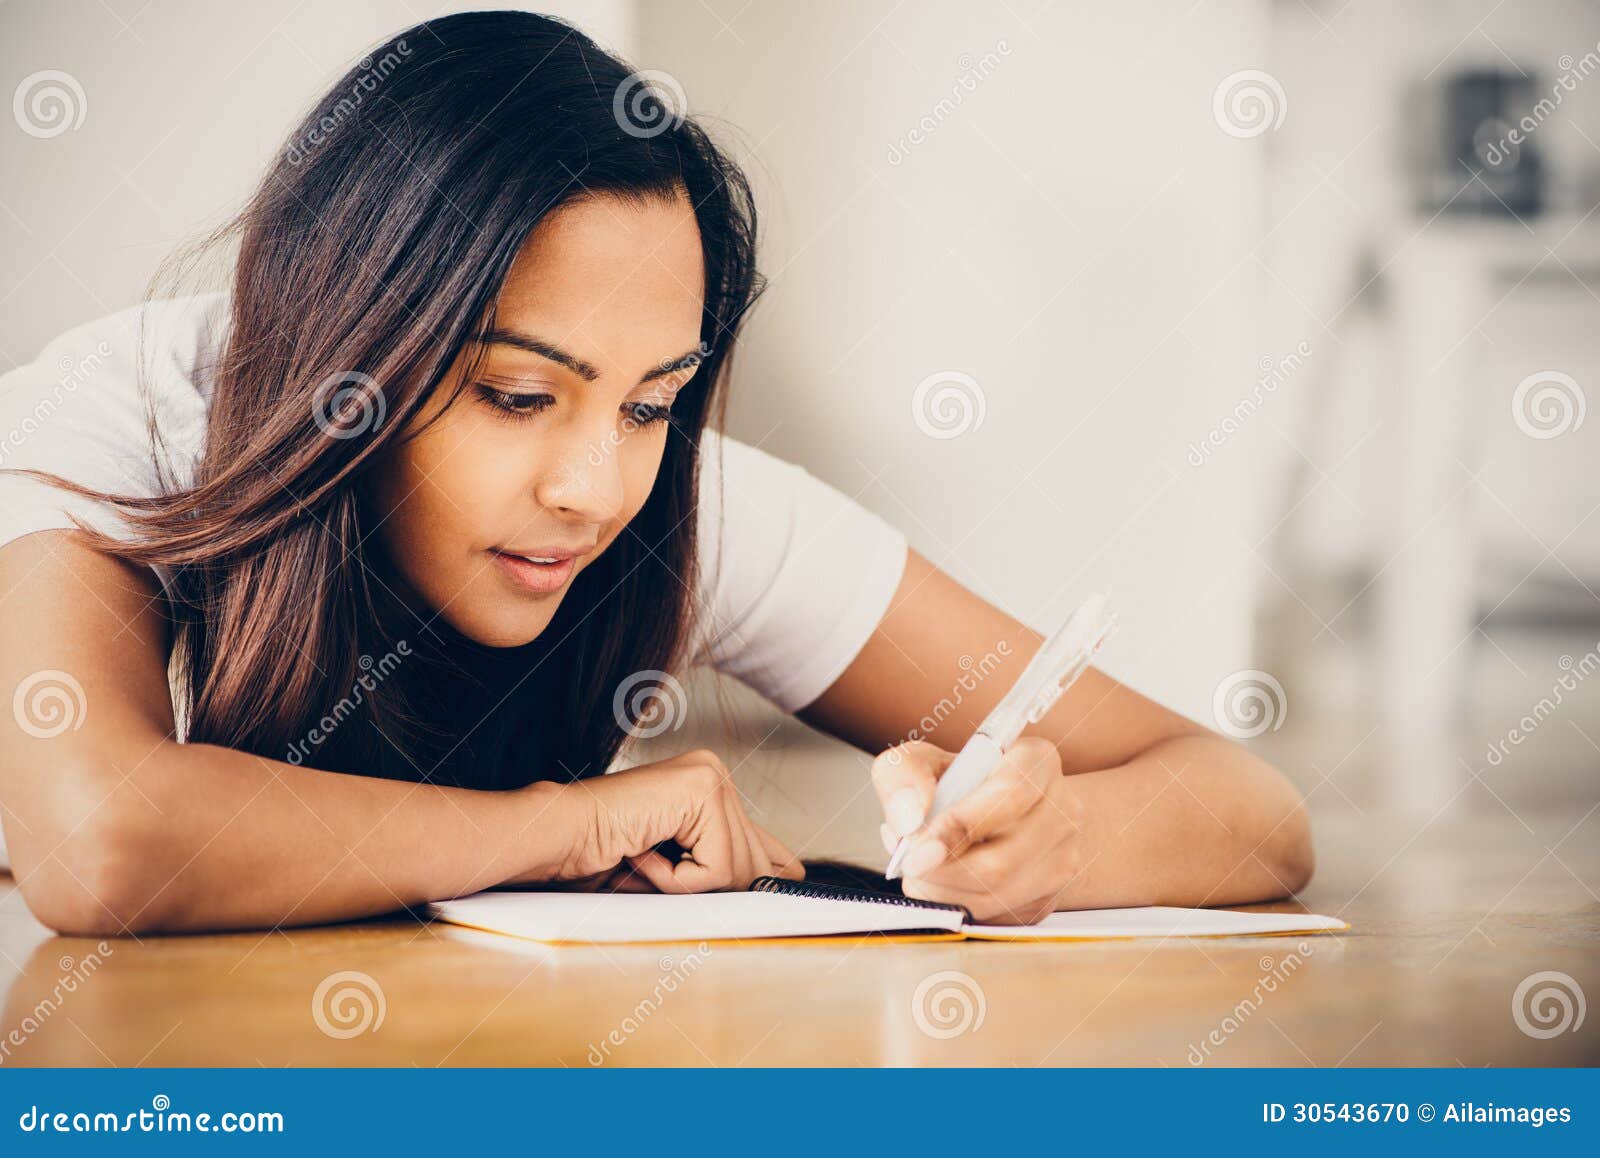 happy indian woman student education writing studying